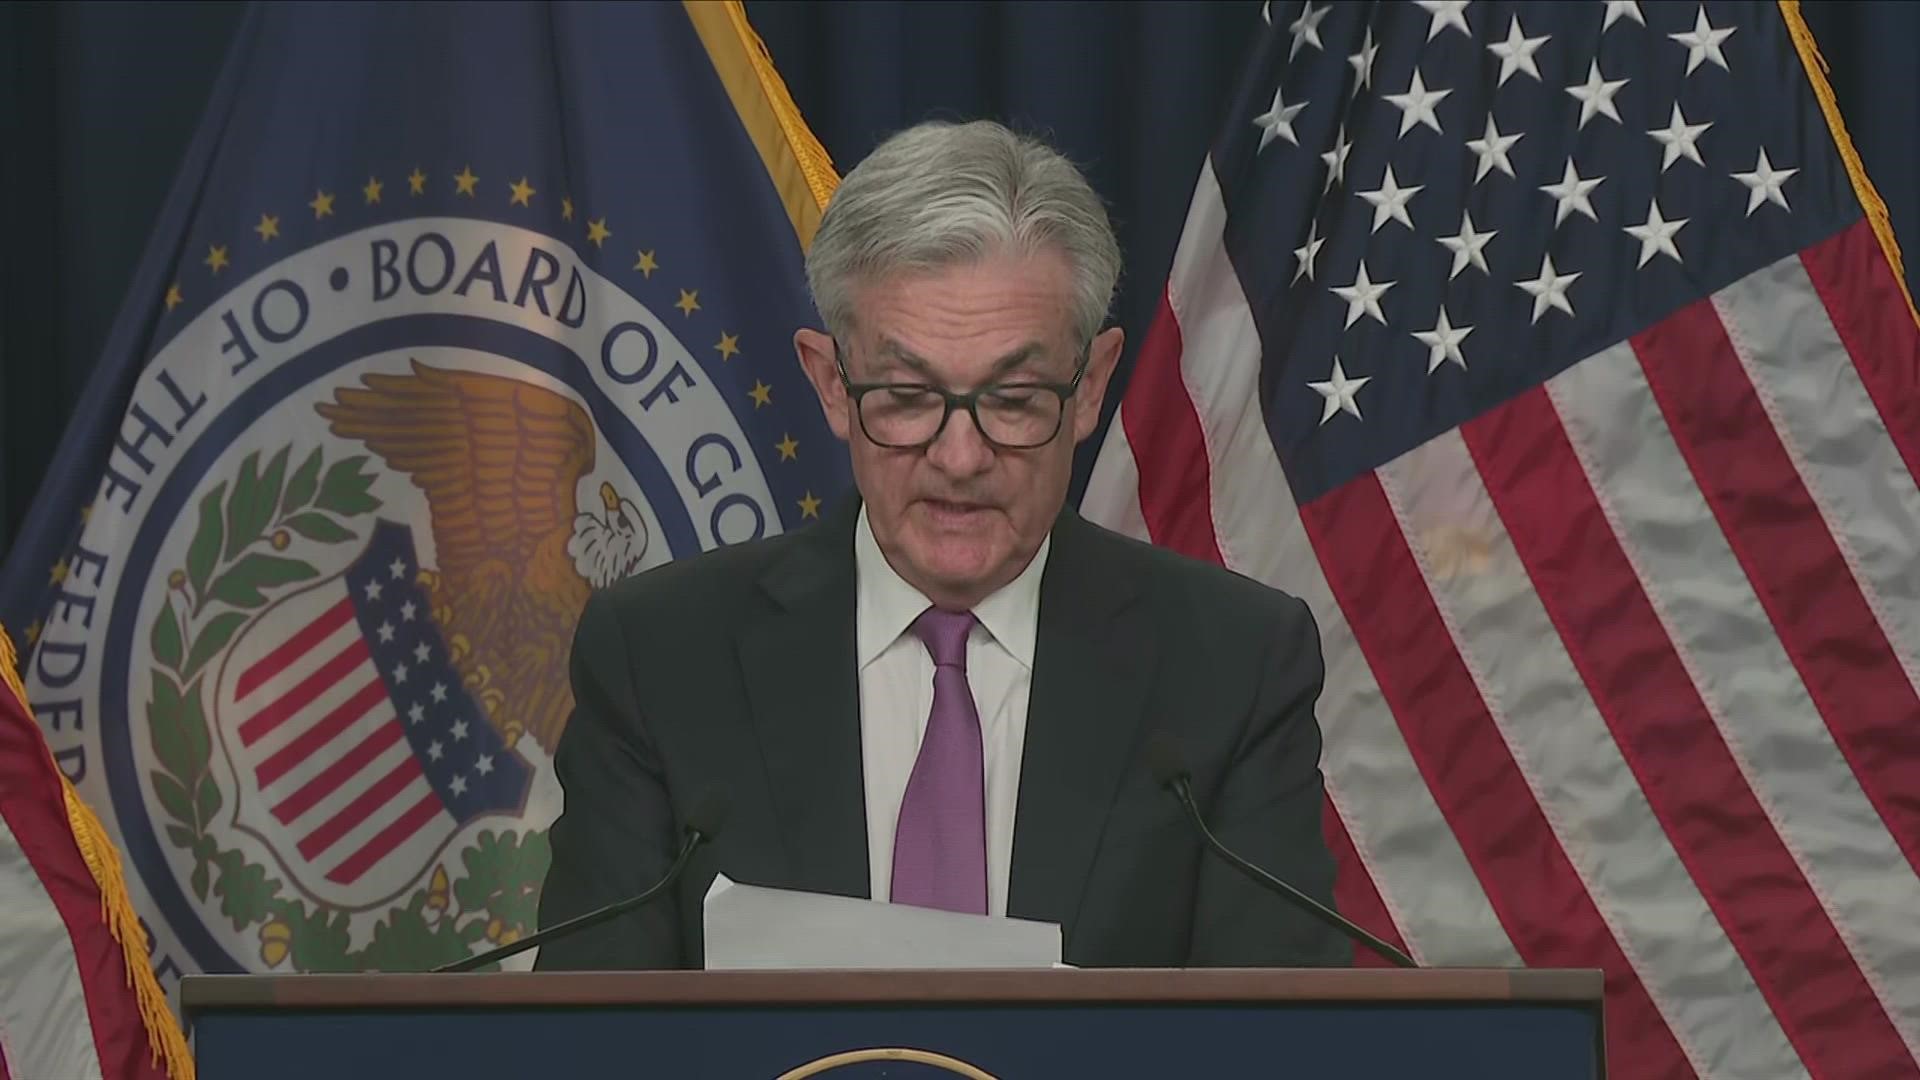 Federal Reserve chair Jerome Powell spoke on the central bank's decision to raise its benchmark interest rate by a hefty three-quarters of a point again.